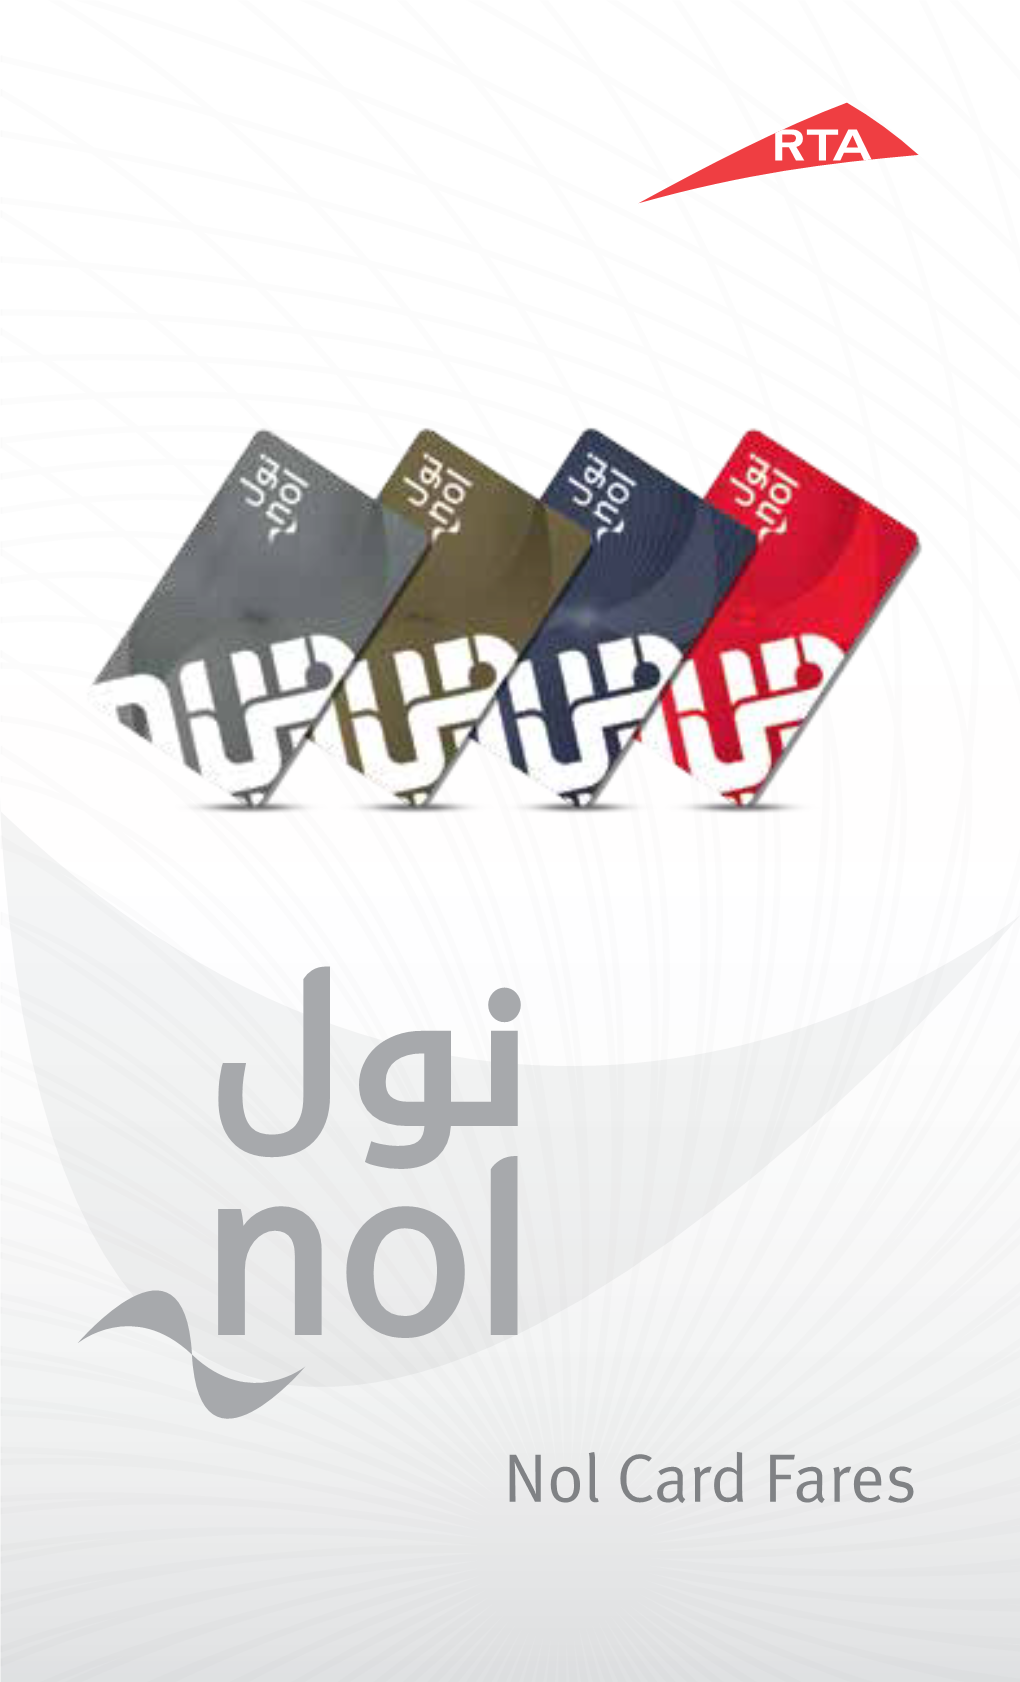 Nol Card Fares Everything You Wanted to Know About the Enhanced Nol Cards